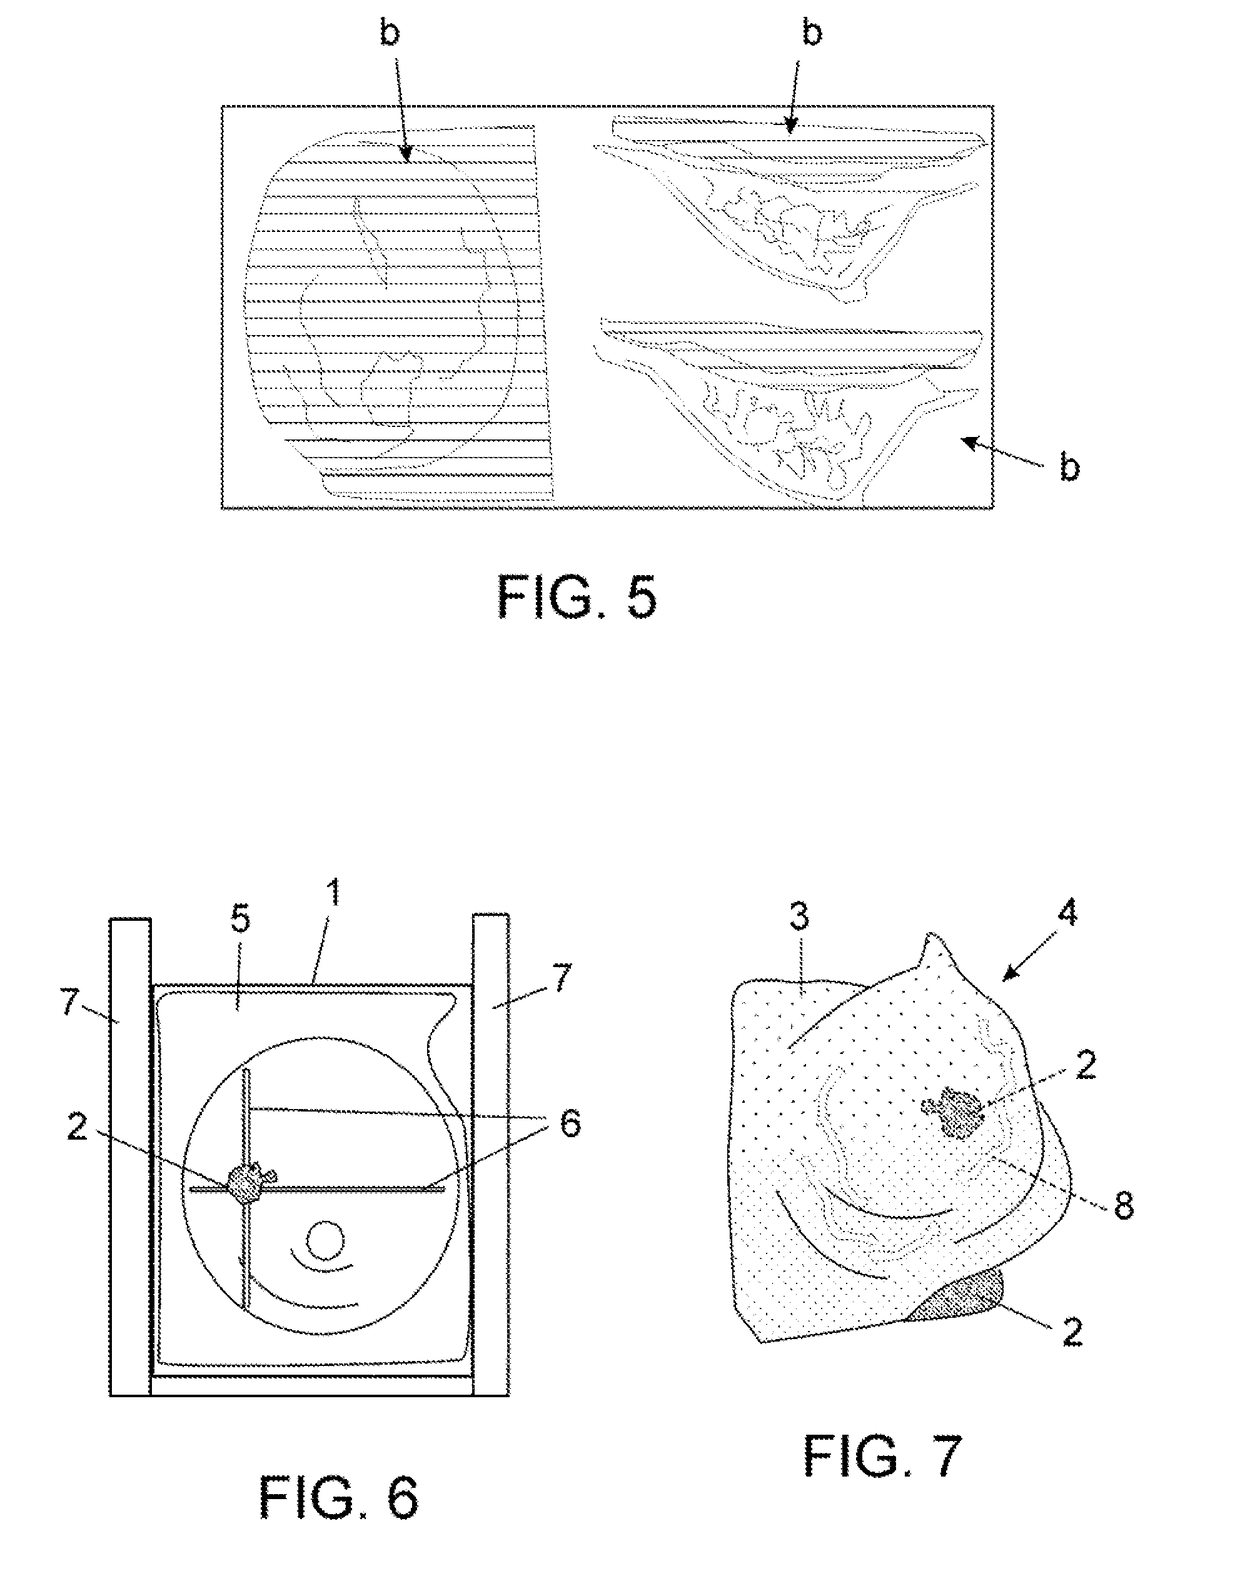 Method for producing anatomical models and models obtained